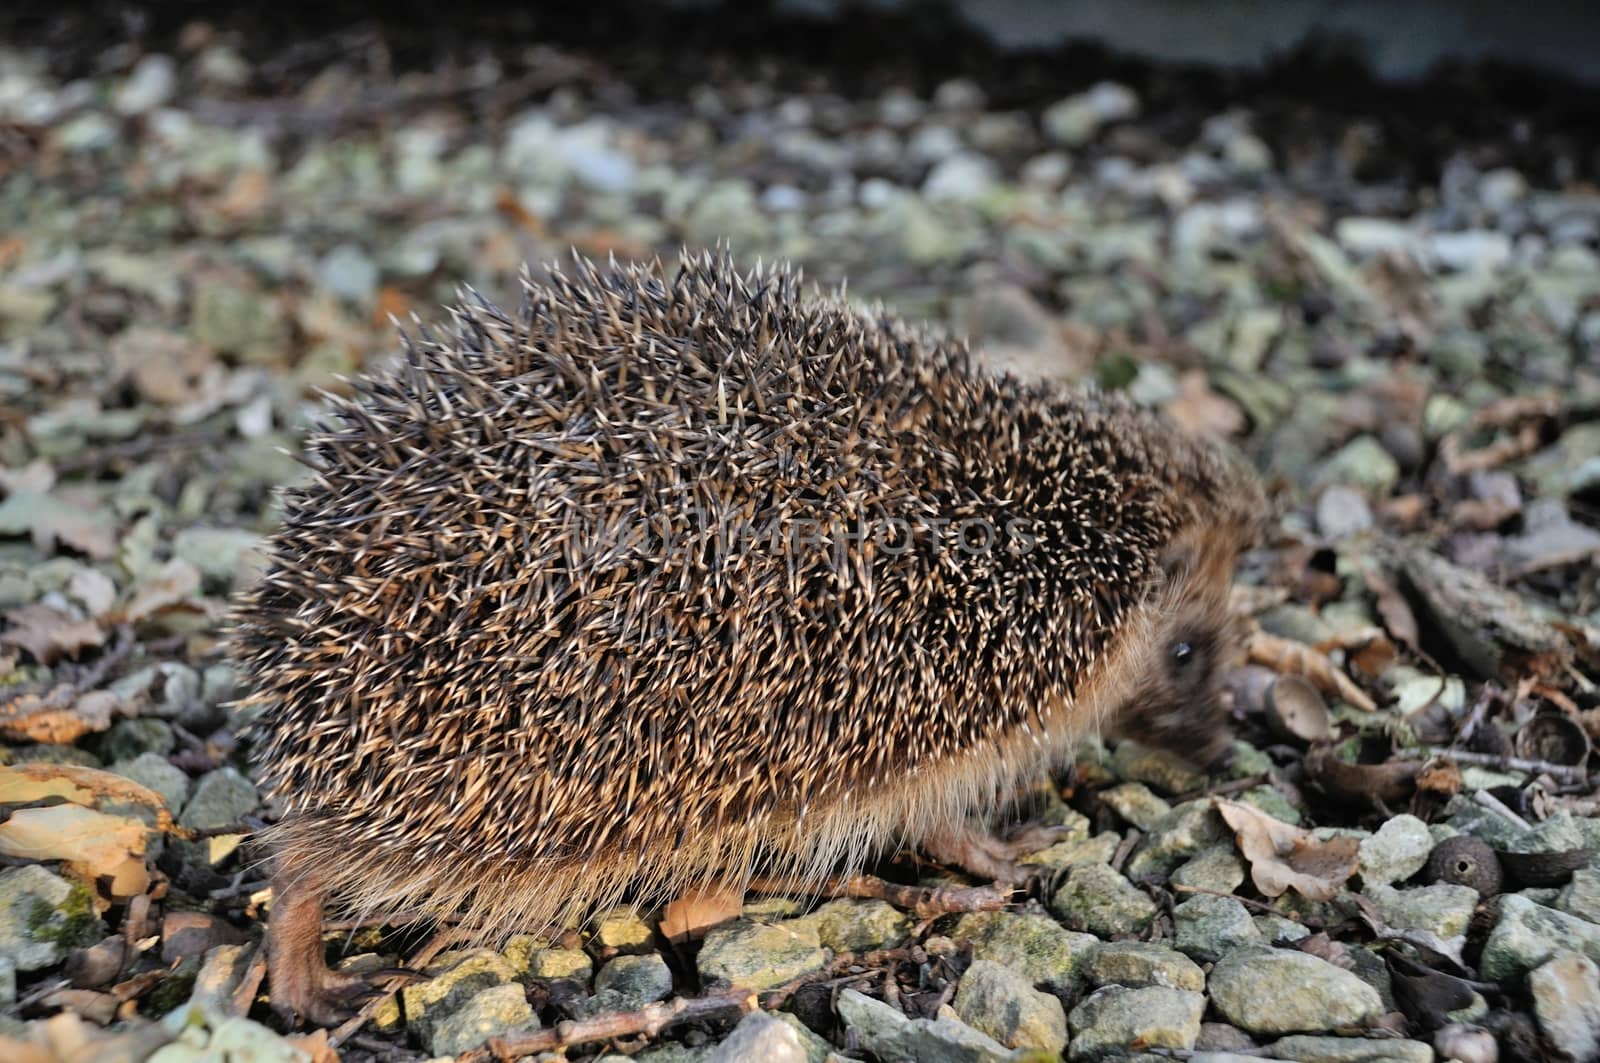 Hedgehog in the driveway of a garden